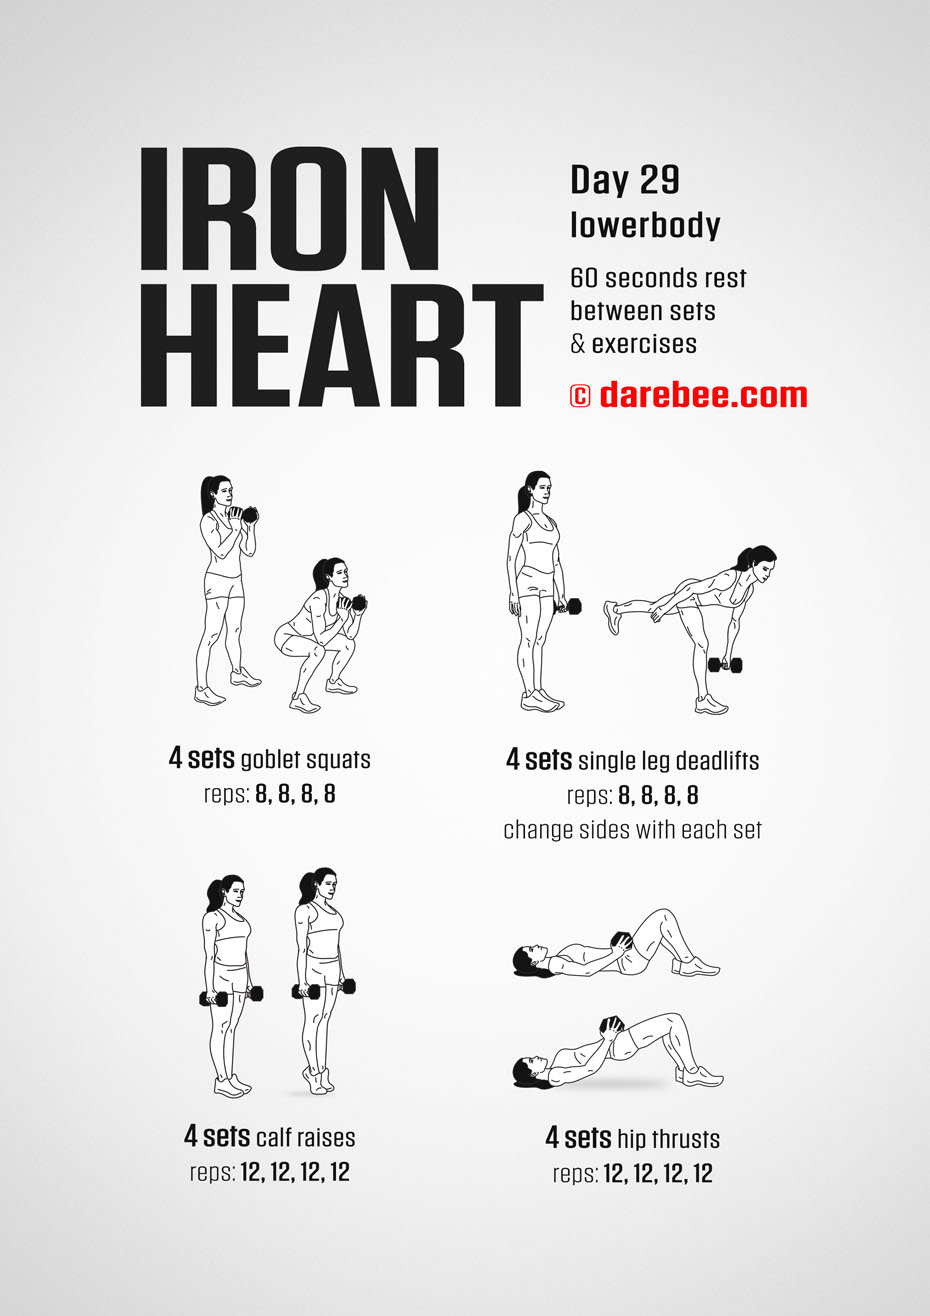 Ironheart - 30 Day Muscle Definition Dumbbell Program by DAREBEE